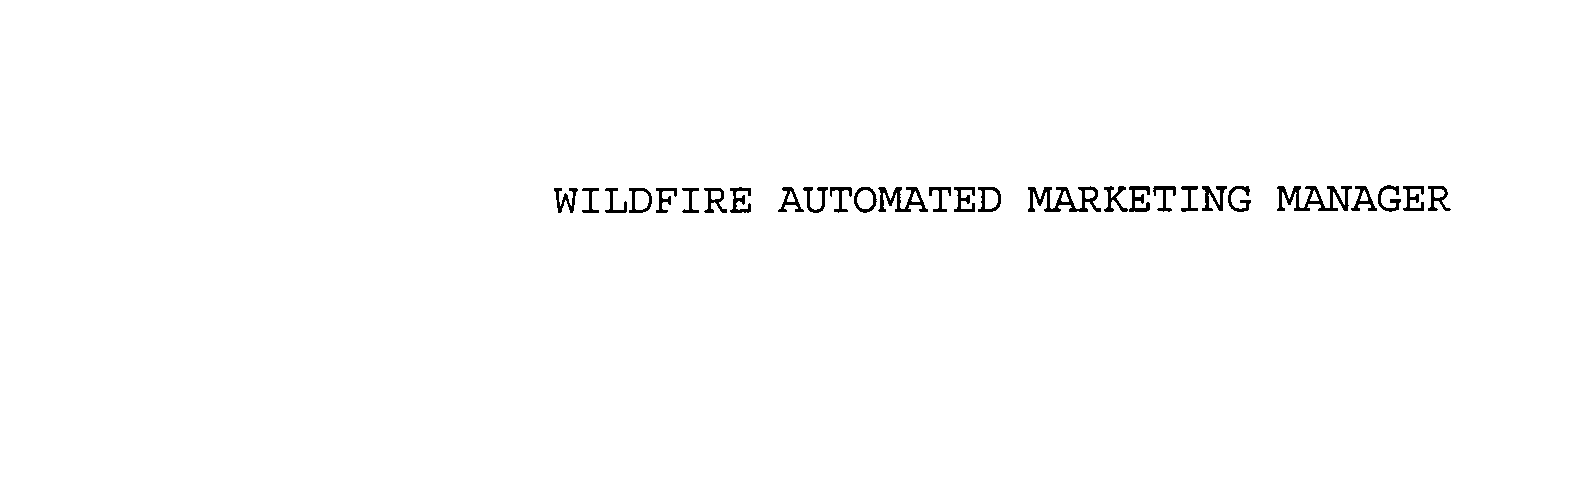  WILDFIRE AUTOMATED MARKETING MANAGER